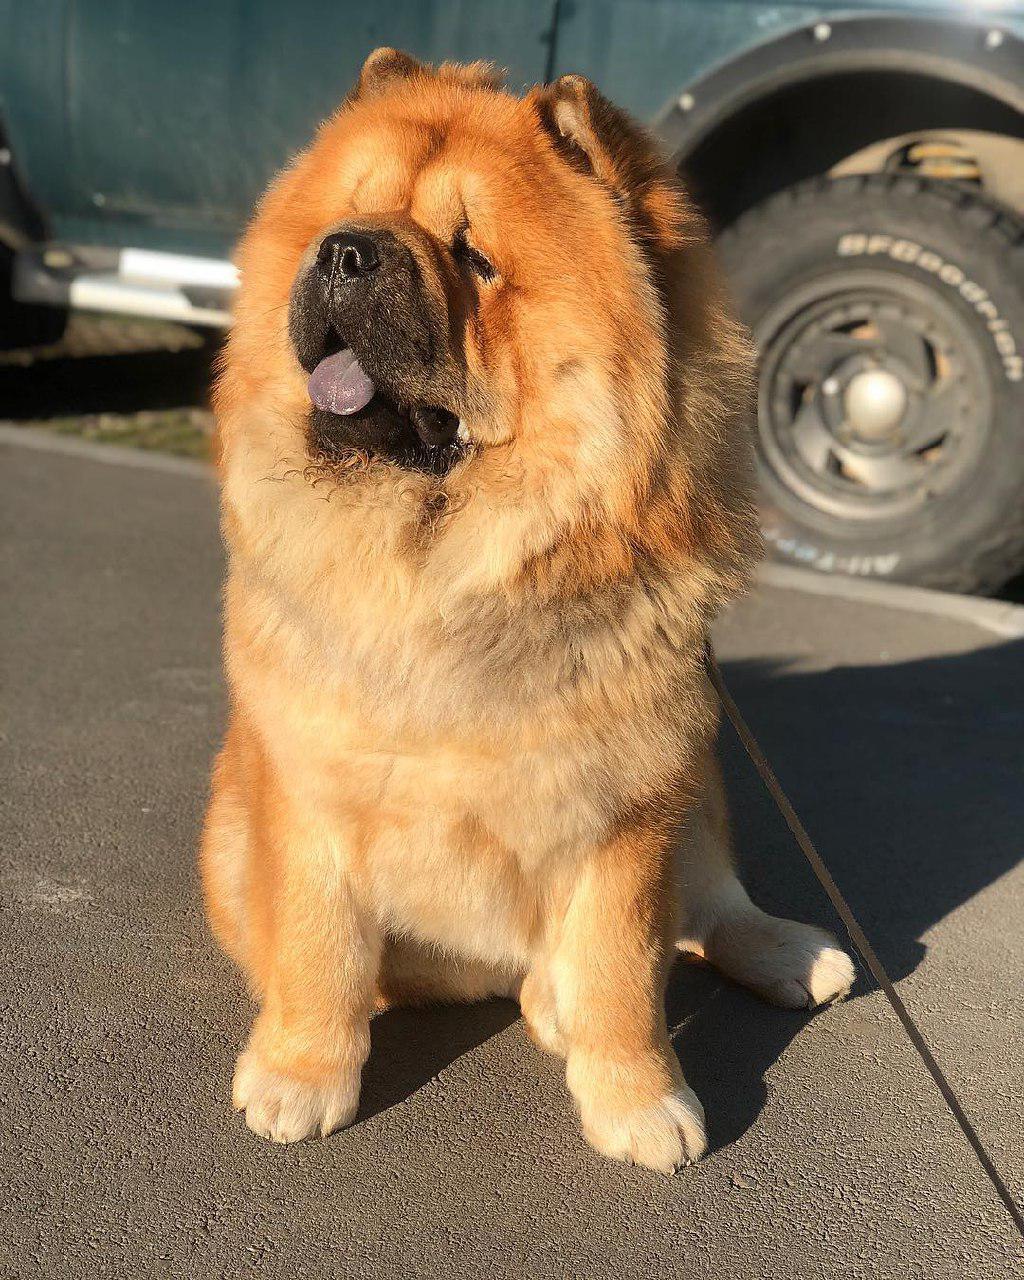 A red Chow Chow sitting on the pavement in the street